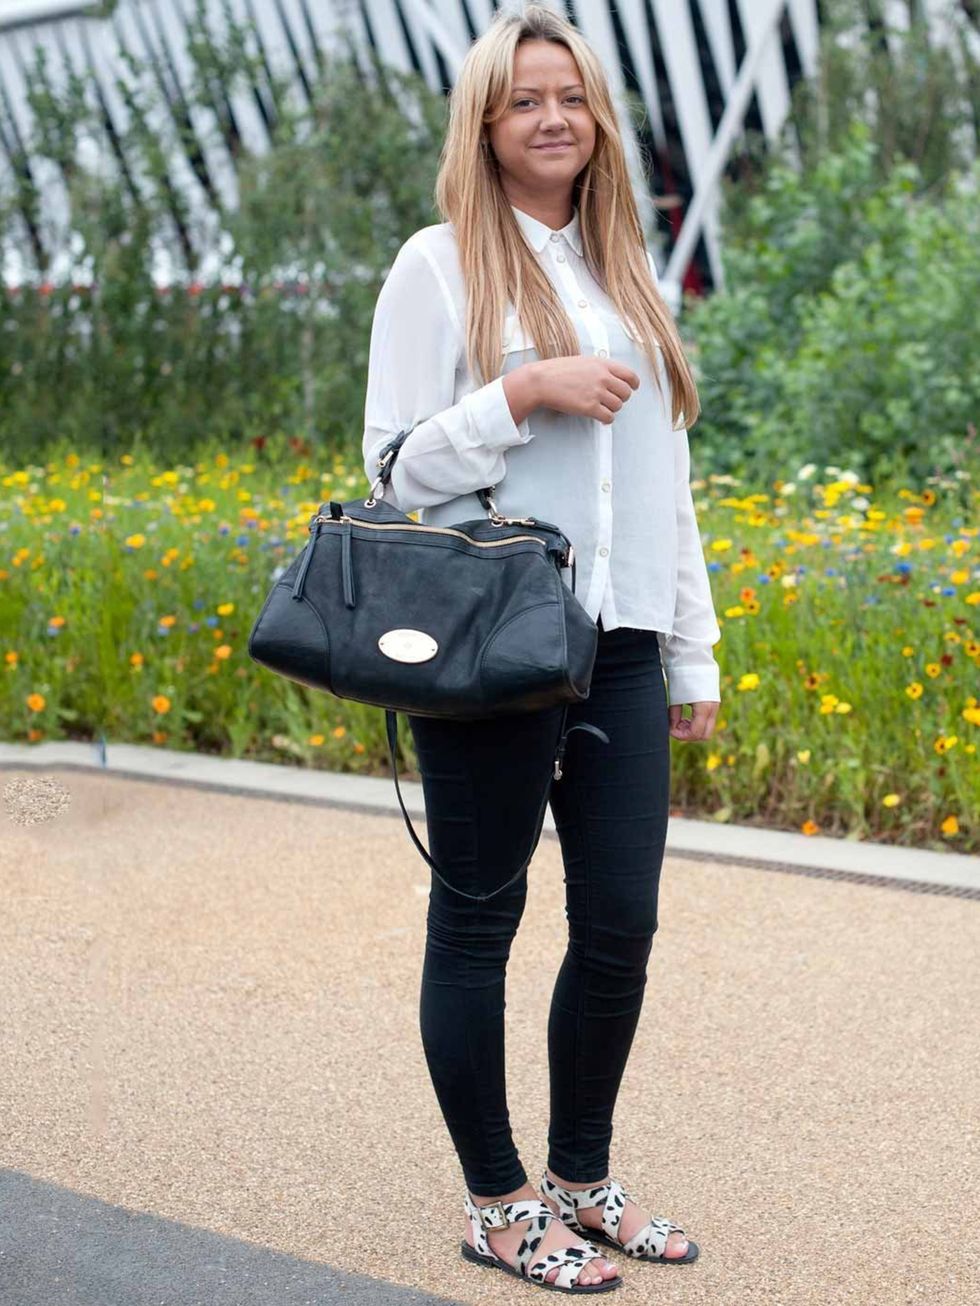 <p>Emma Warner, 23, Office Manager.Topshop shirt and leggings, Urban Outfitters shoes, Mulberry bag.</p>